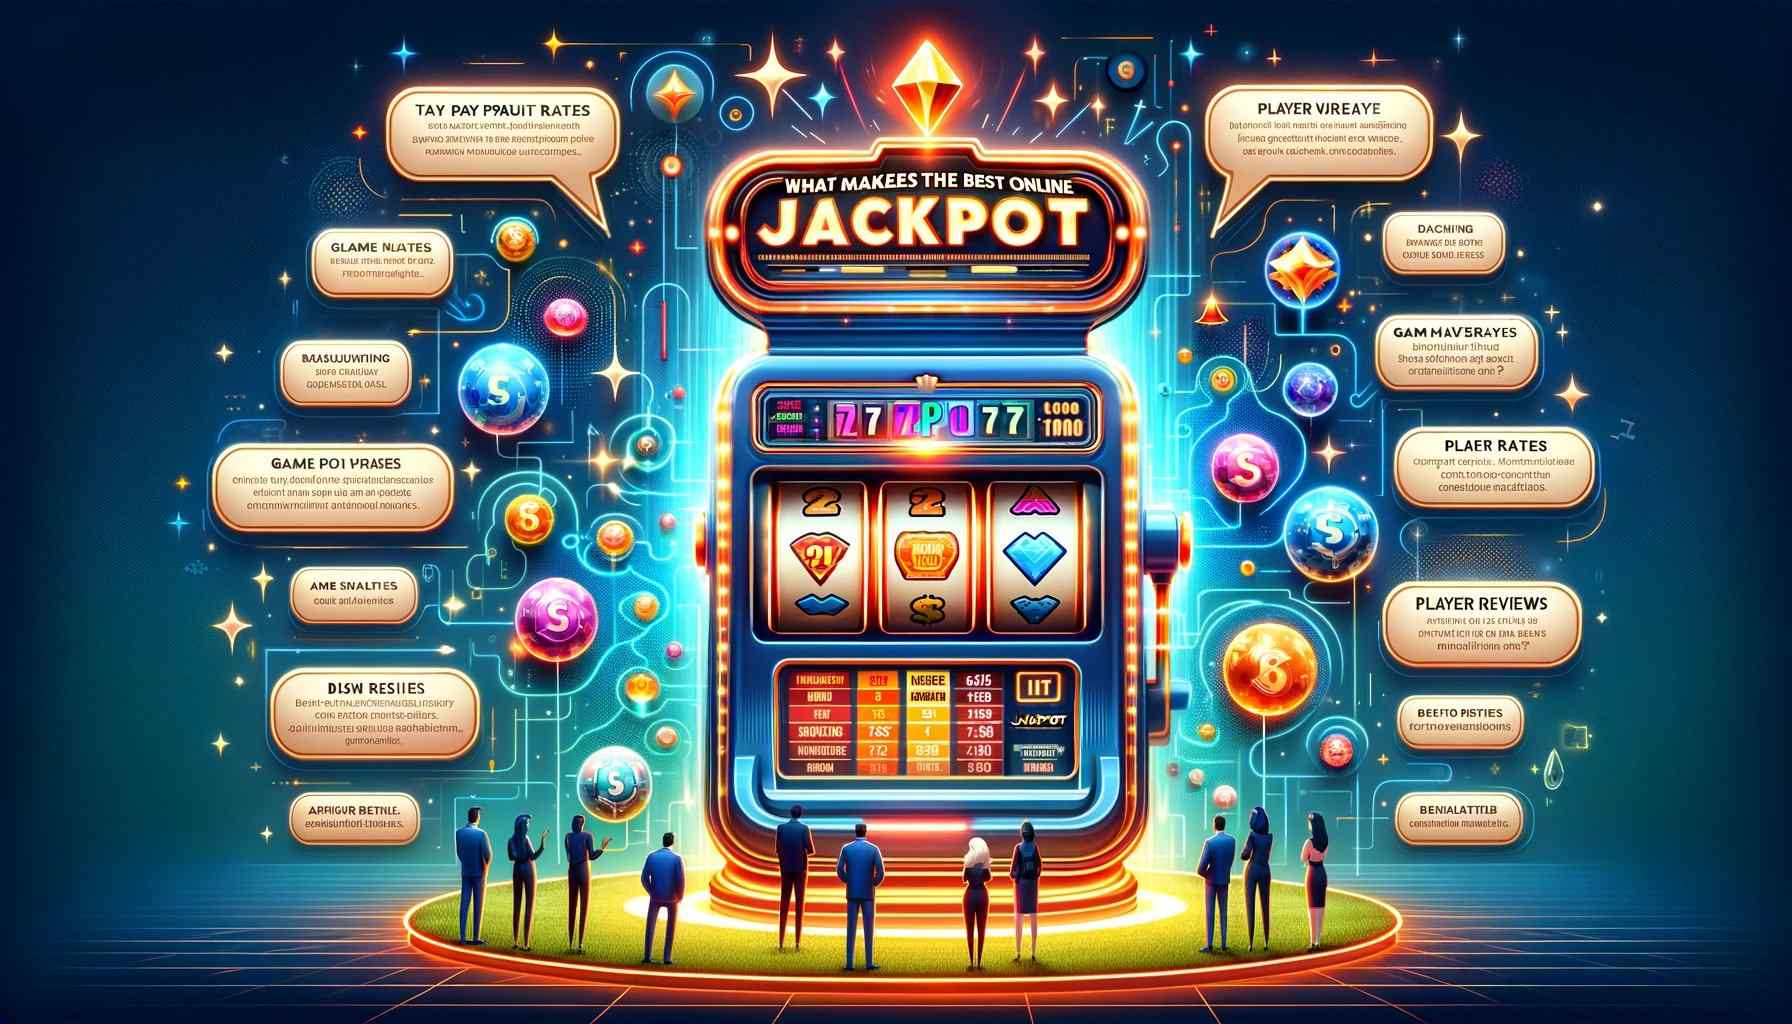 What makes the best online casino jackpots